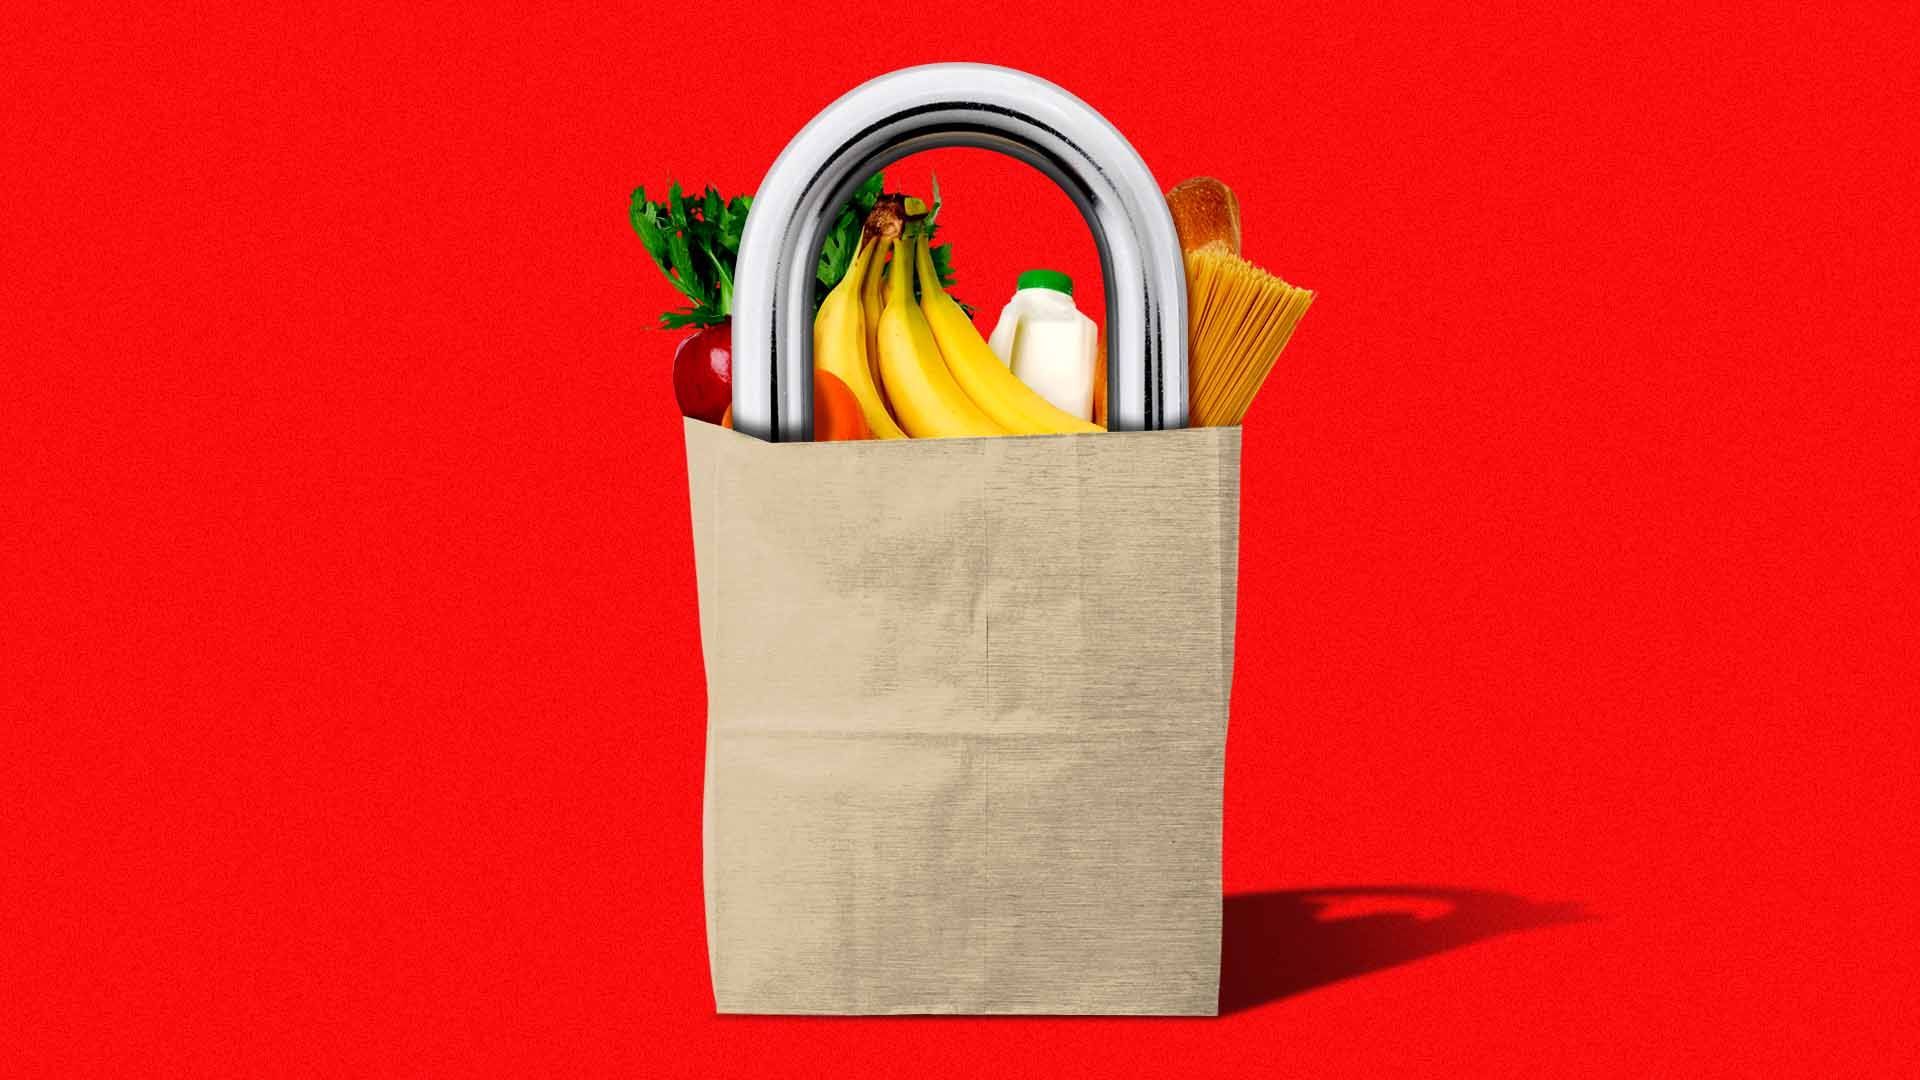 Illustration of a padlock as a bag of groceries 